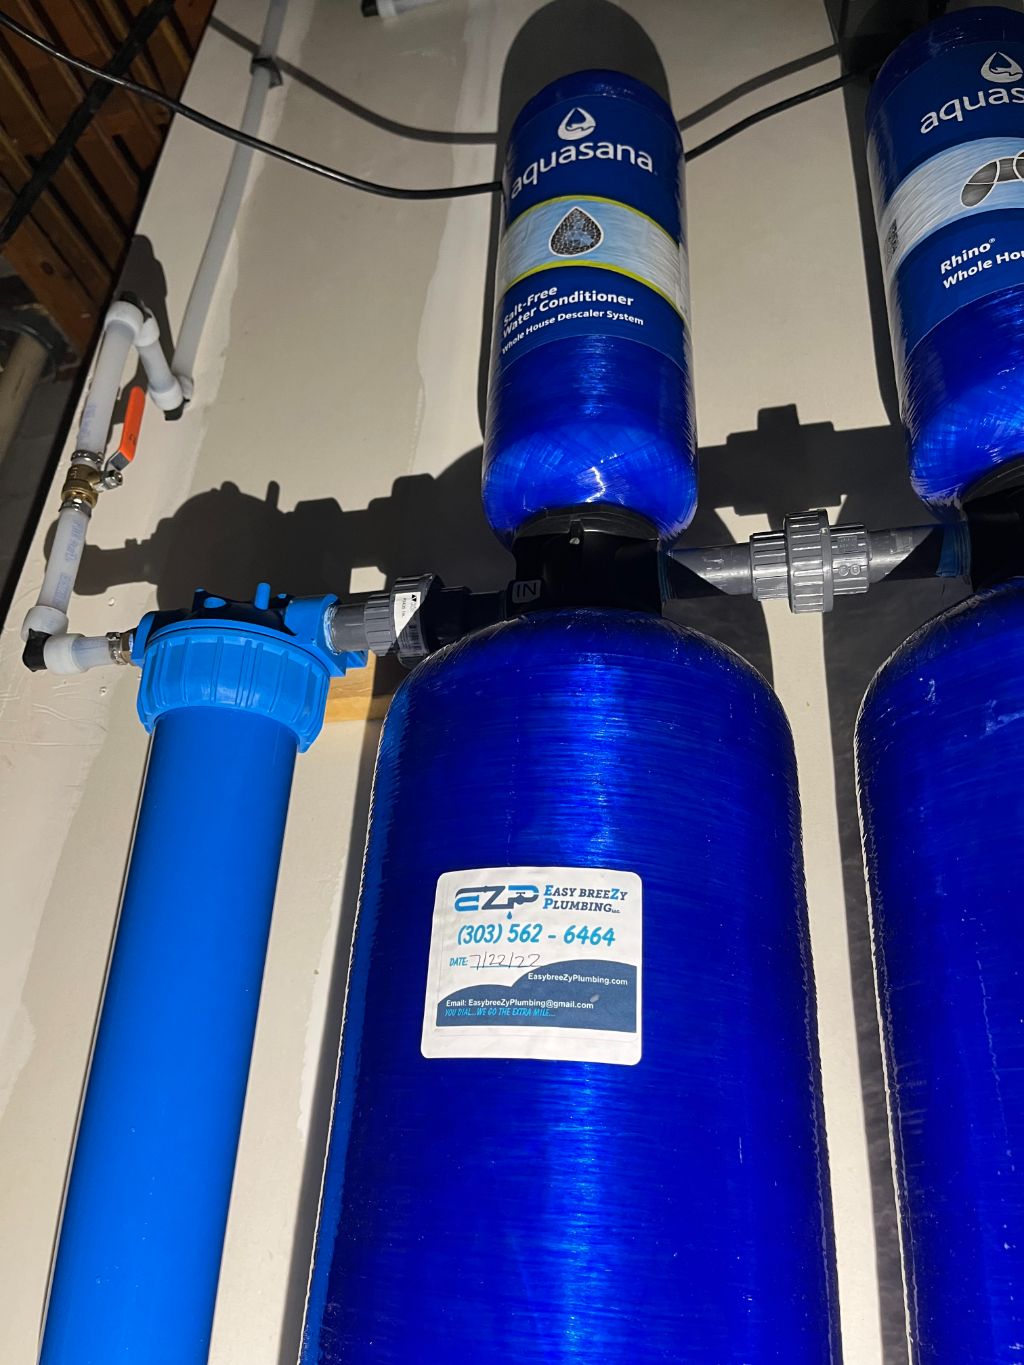 Aquasana Whole Home Filtration System in Fort Lupton, CO